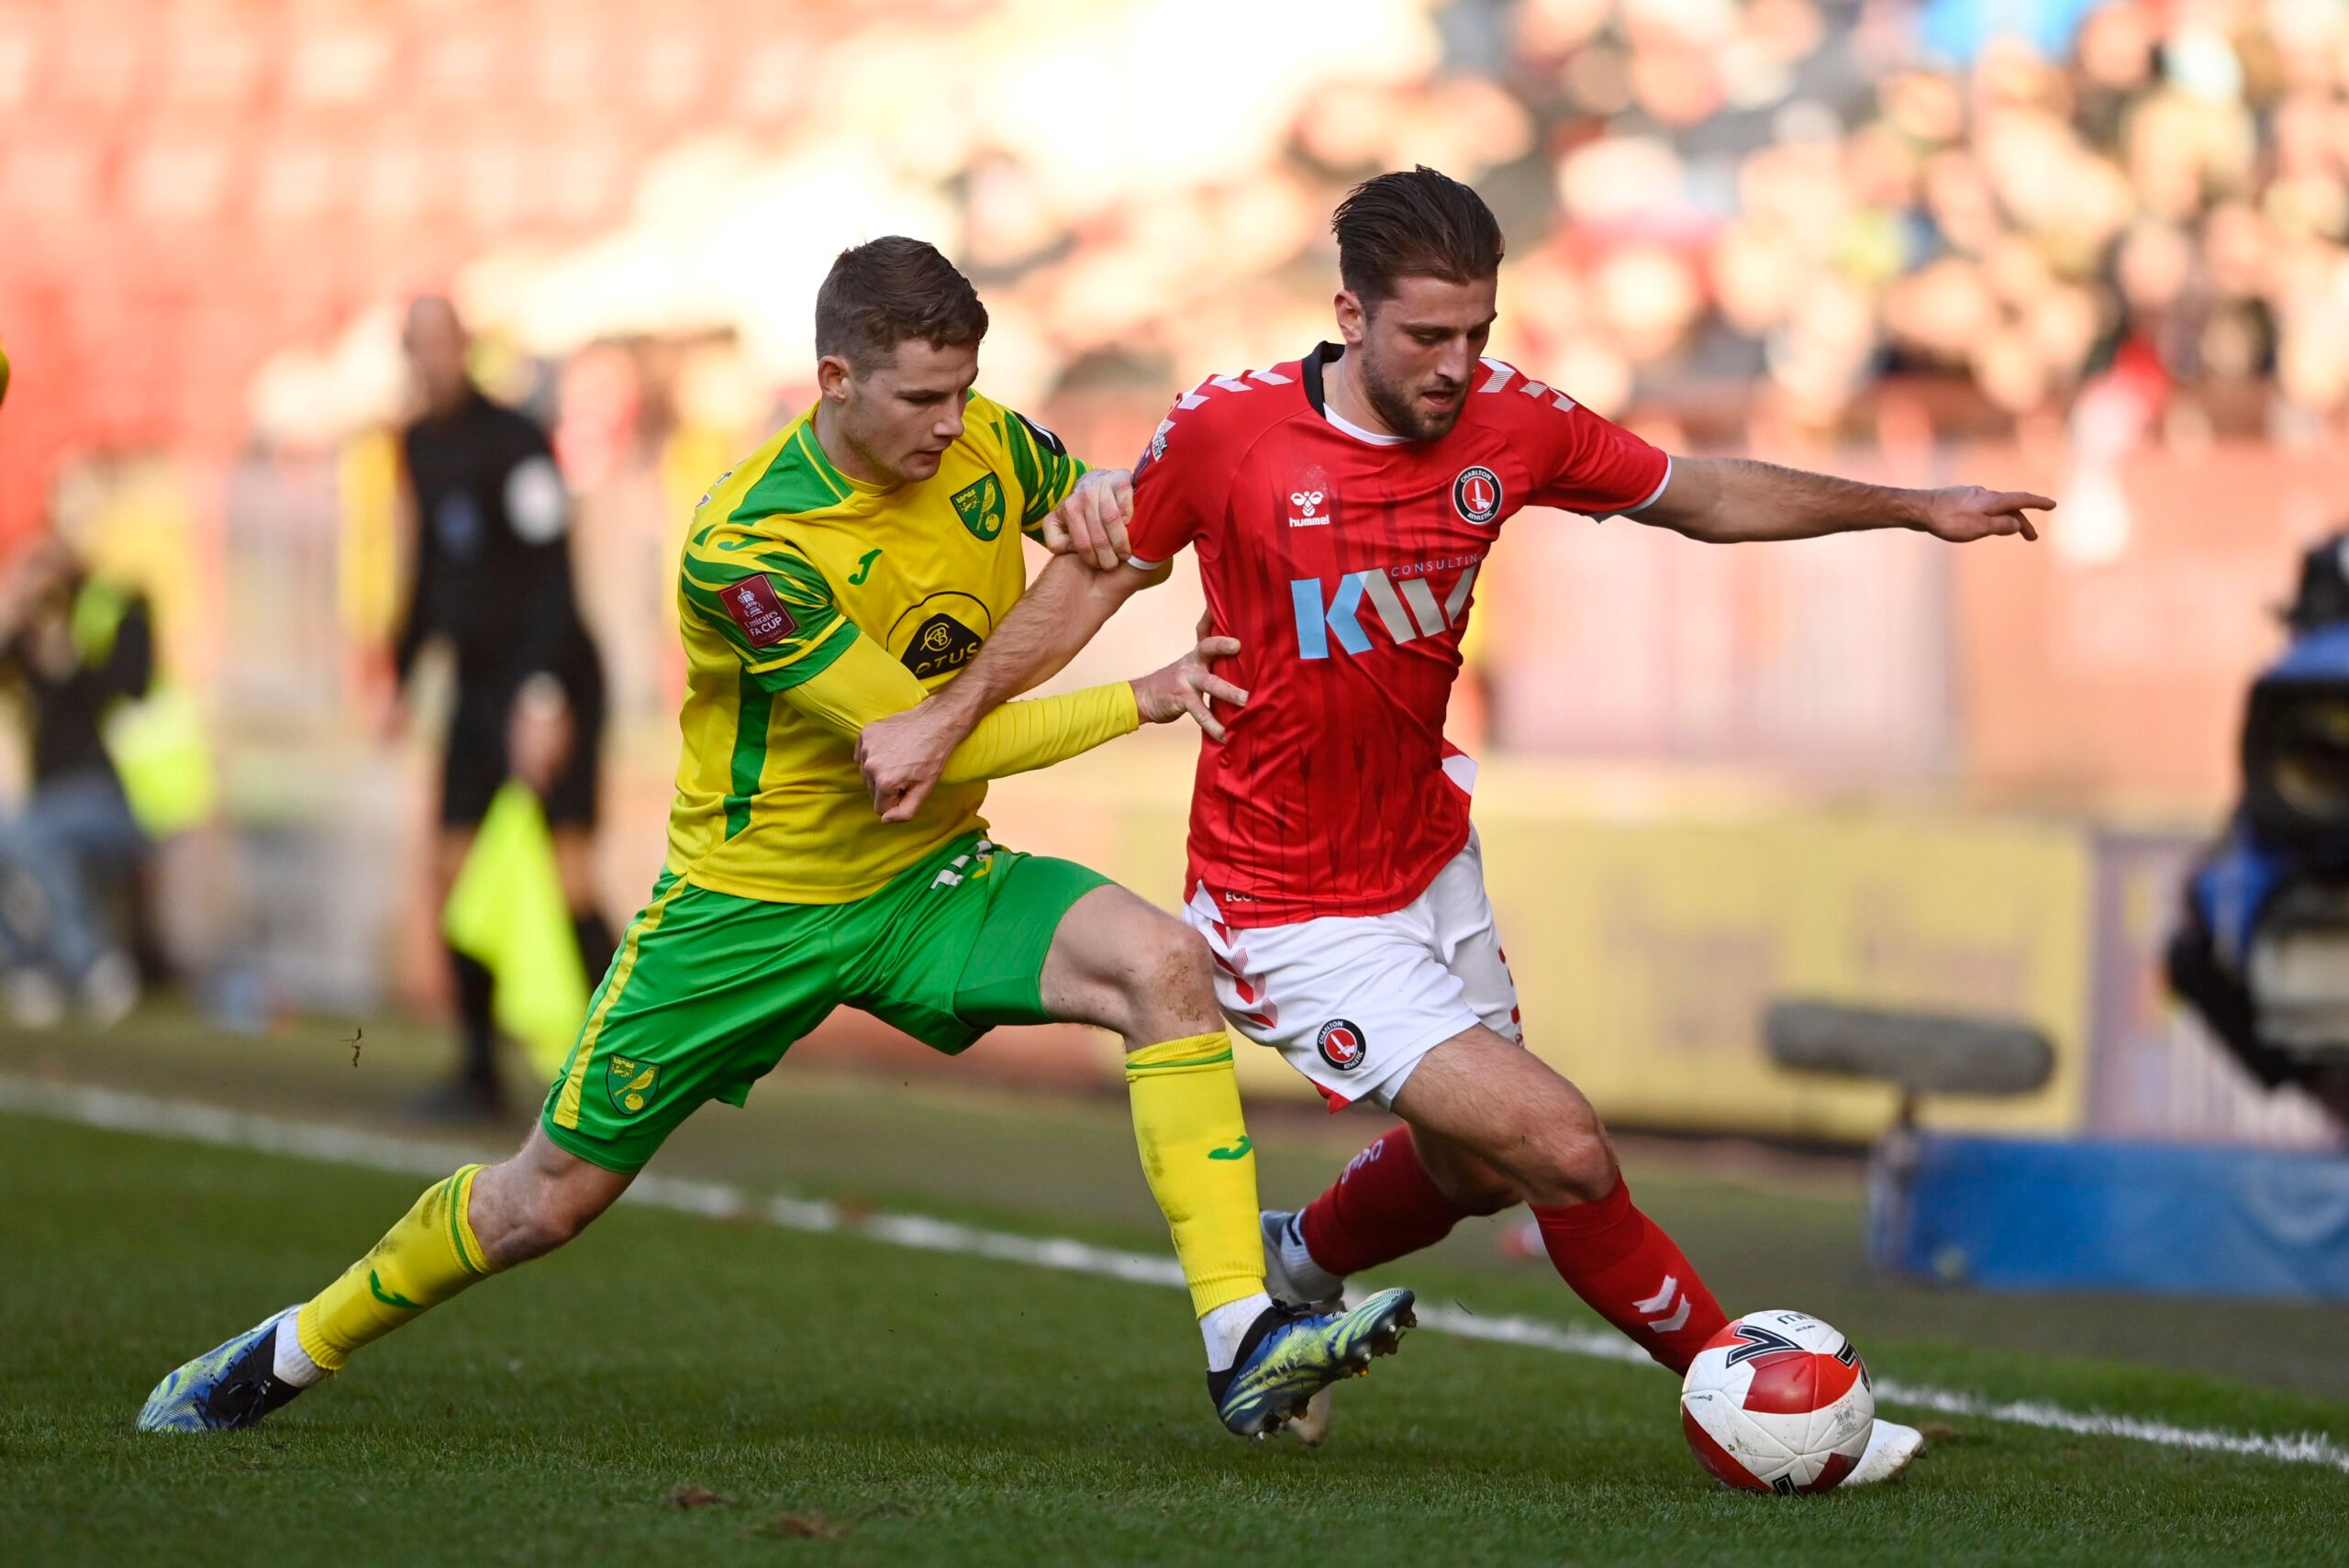 Soccer Football - FA Cup Third Round - Charlton Athletic v Norwich City - The Valley, London, Britain - January 9, 2022 Charlton Athletic's Ben Purrington in action with Norwich City's Jacob Sorensen REUTERS/Tony Obrien